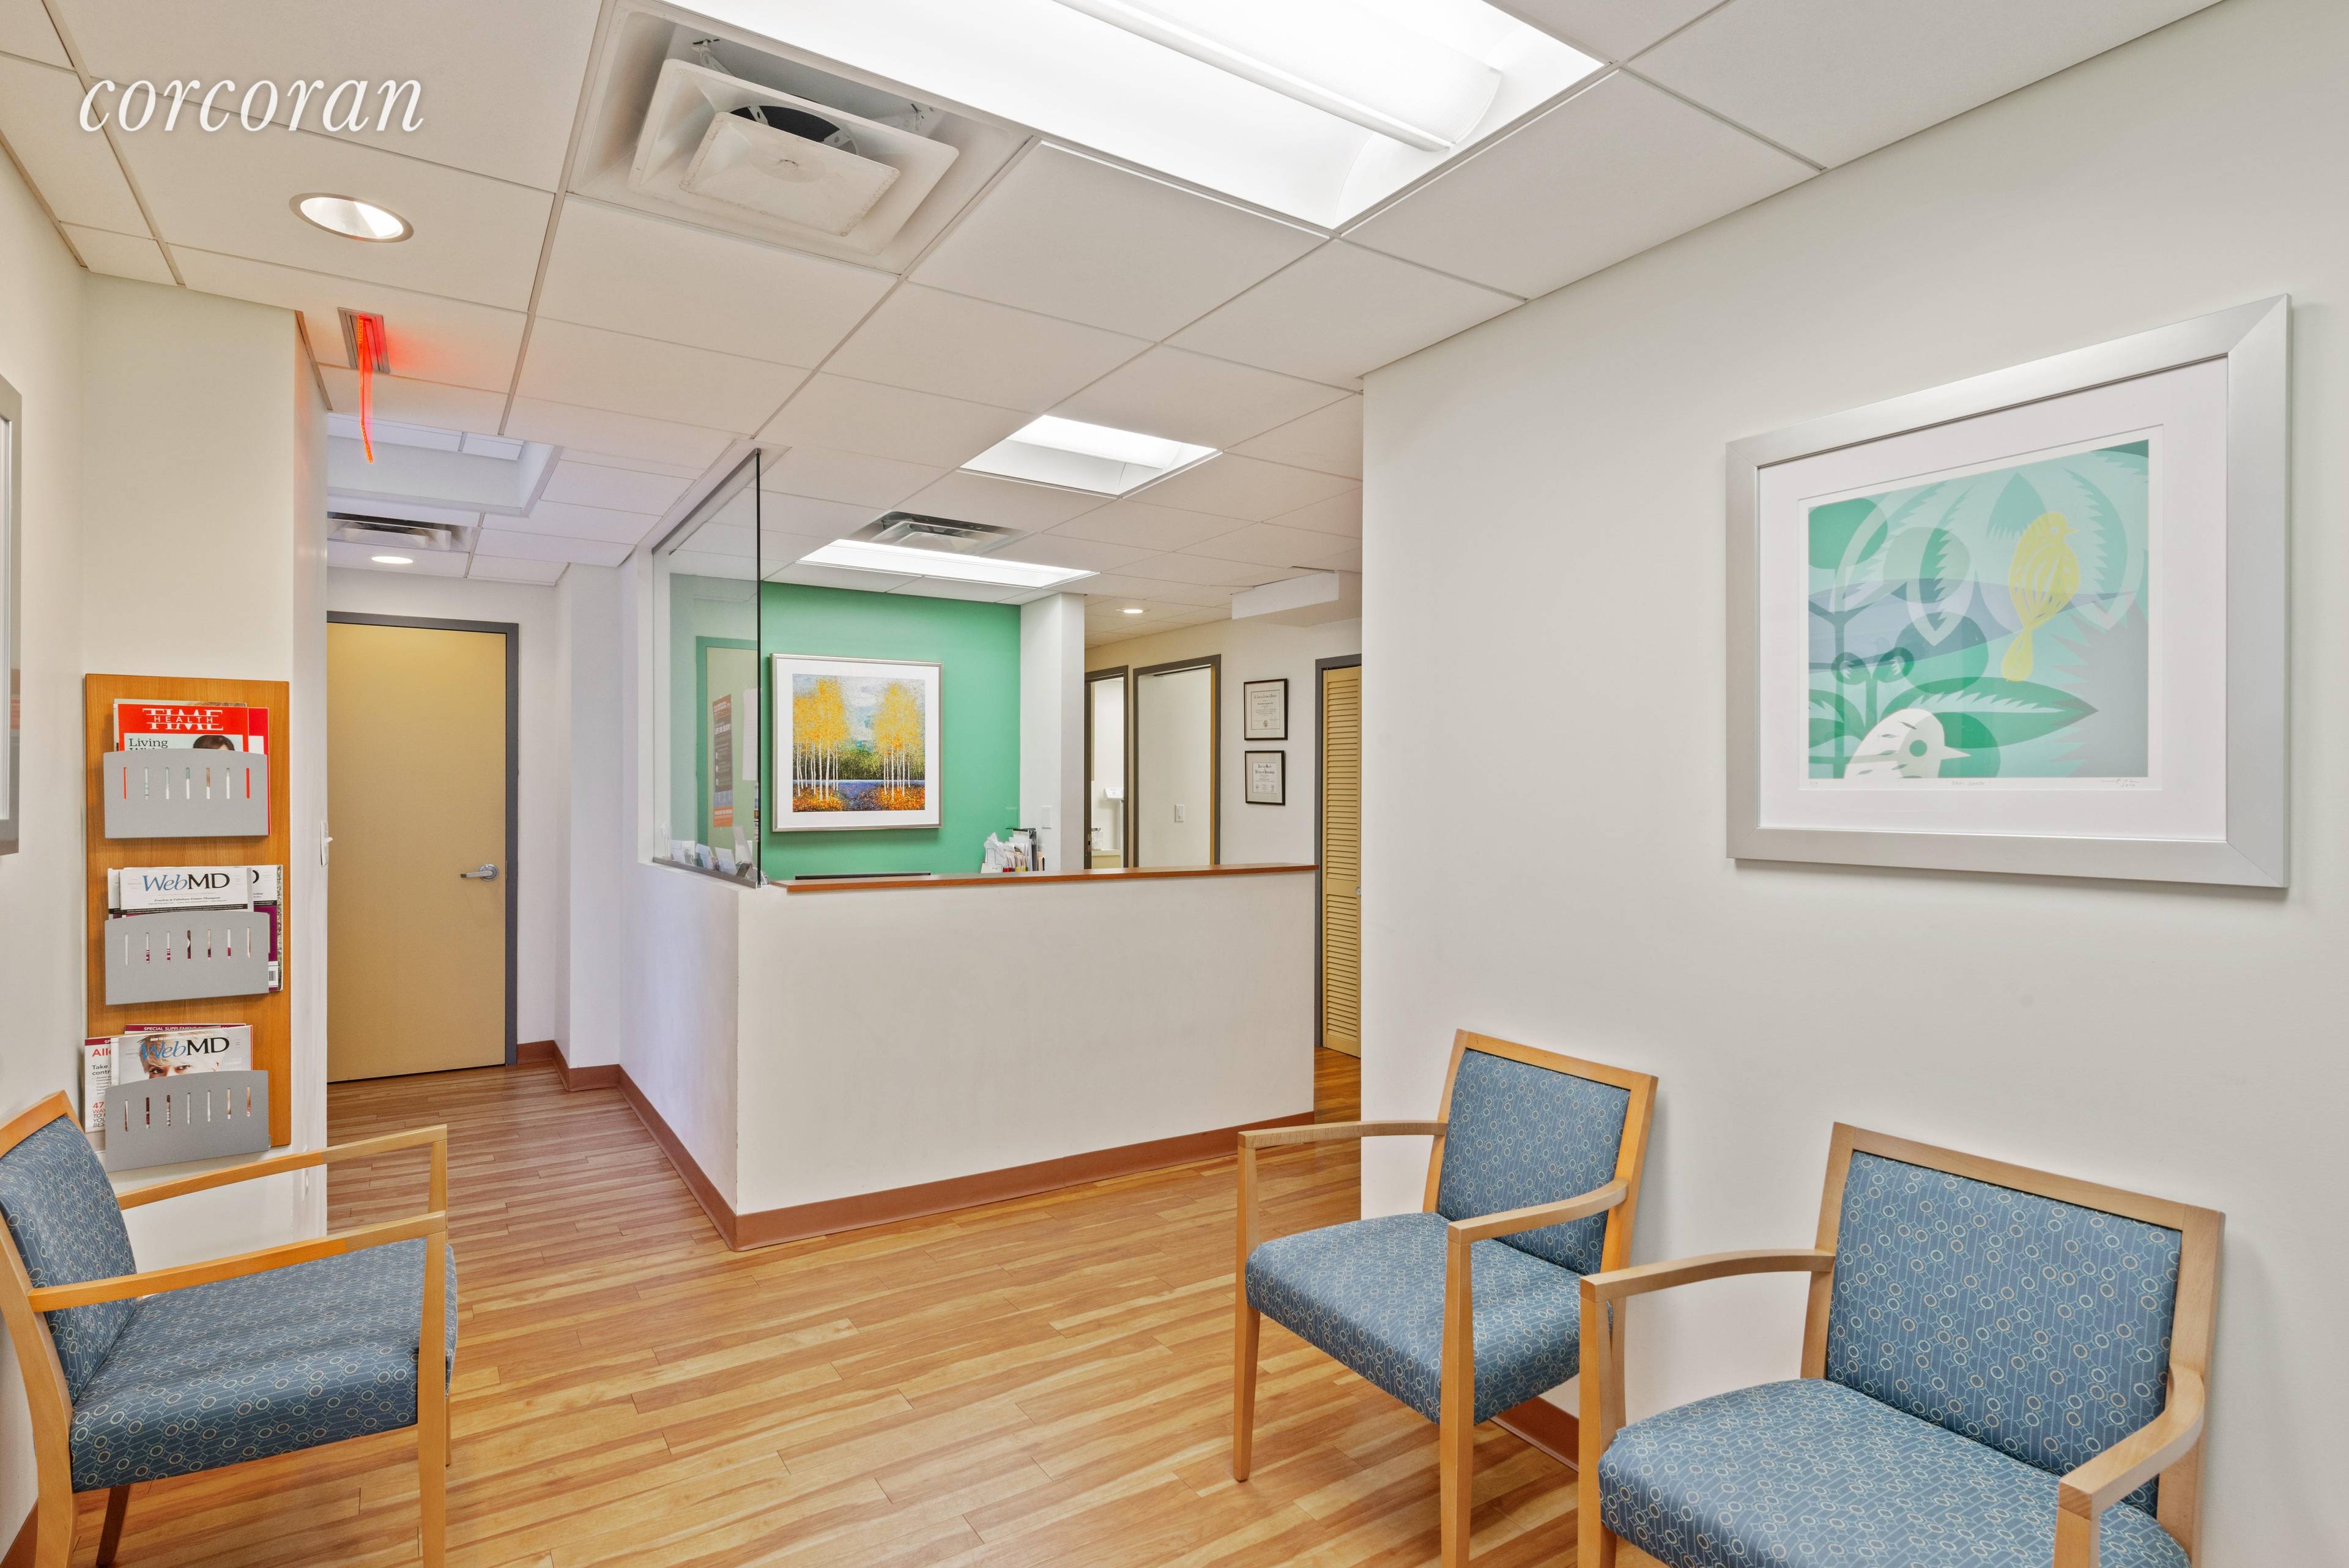 Pristine ground floor medical office featuring two exam rooms, a waiting reception area, and two administrative offices.